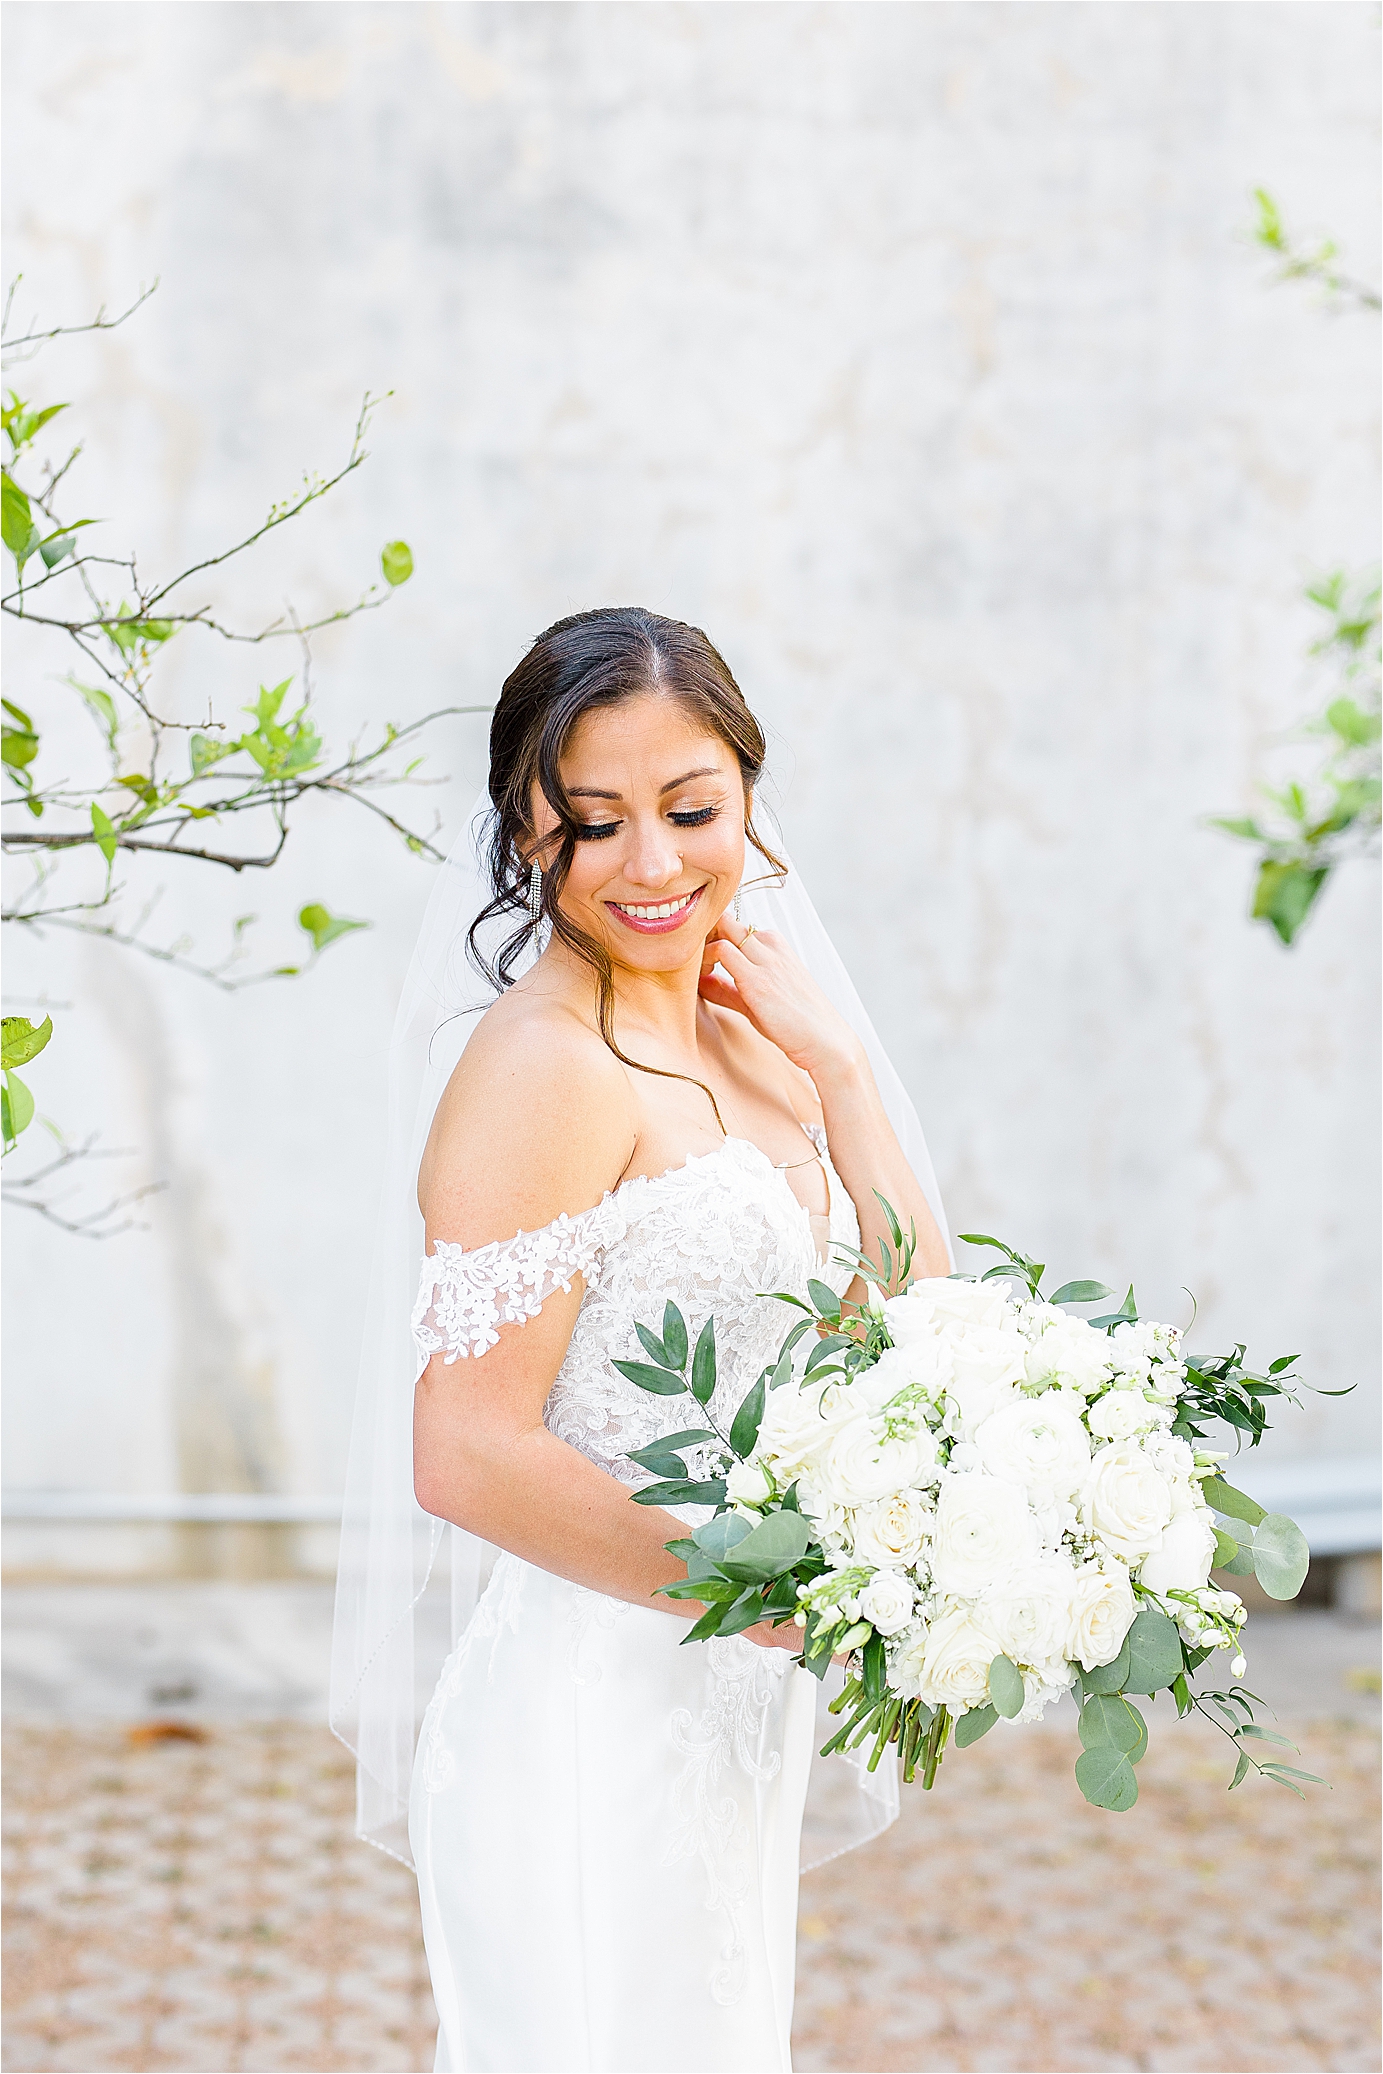 A bride looks over her shoulder holding white bouquet at San Antonio Botanical Garden for her Bridal Portraits with Jillian Hogan Photography 